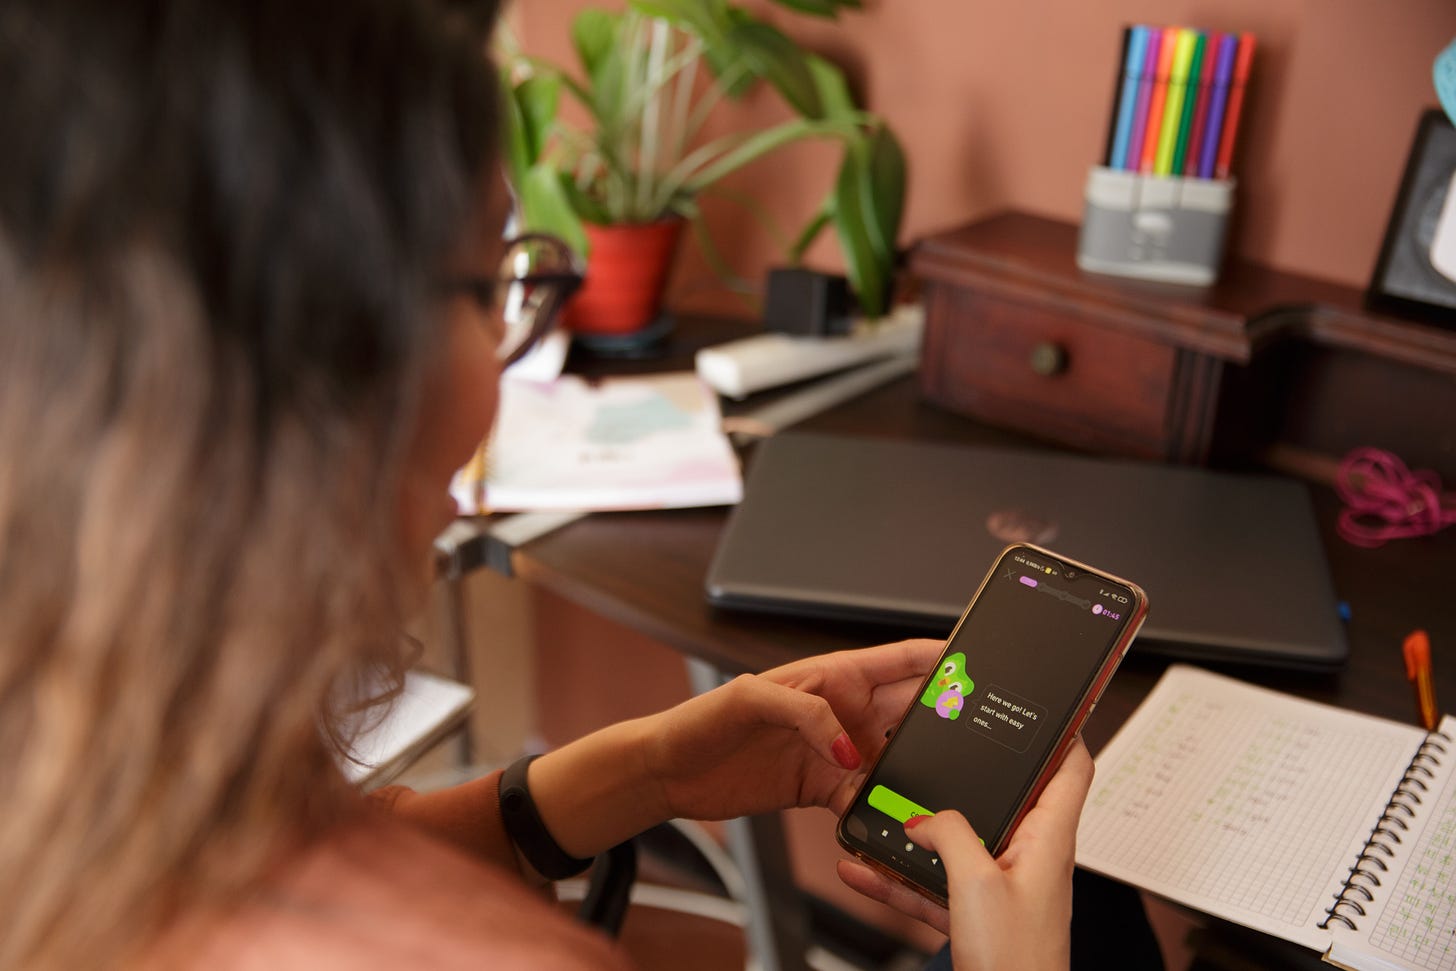 A woman holding a smartphone with the Duolingo app open